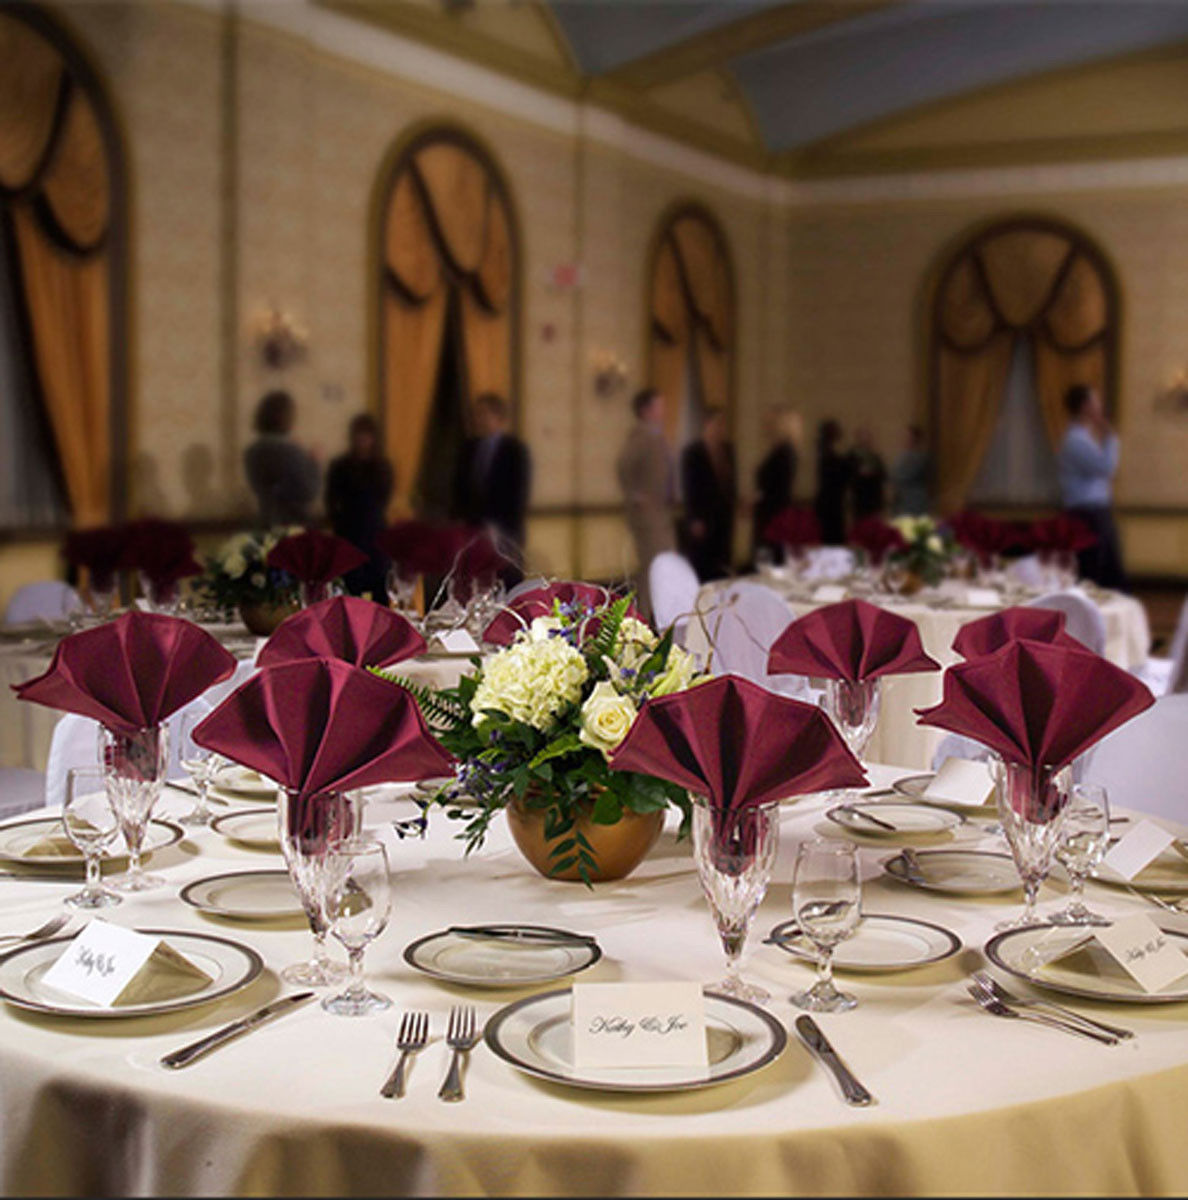 How does the soil release technology affect the 120 inch round tablecloth in Signature Plus linens?